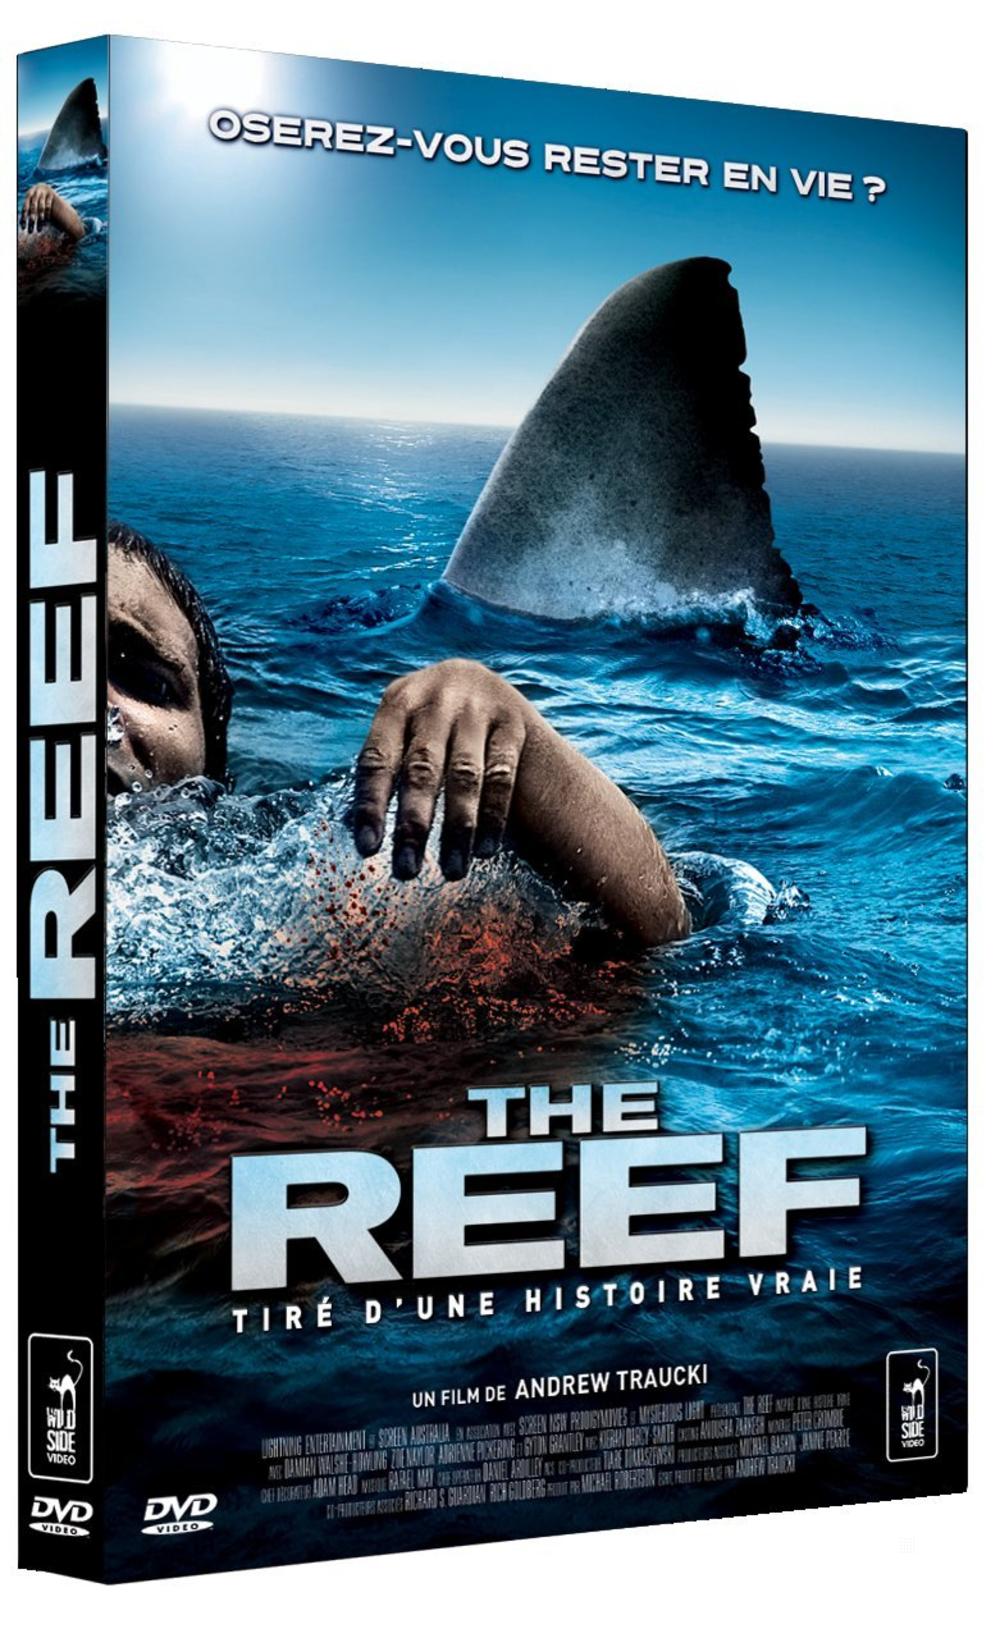 THE REEF